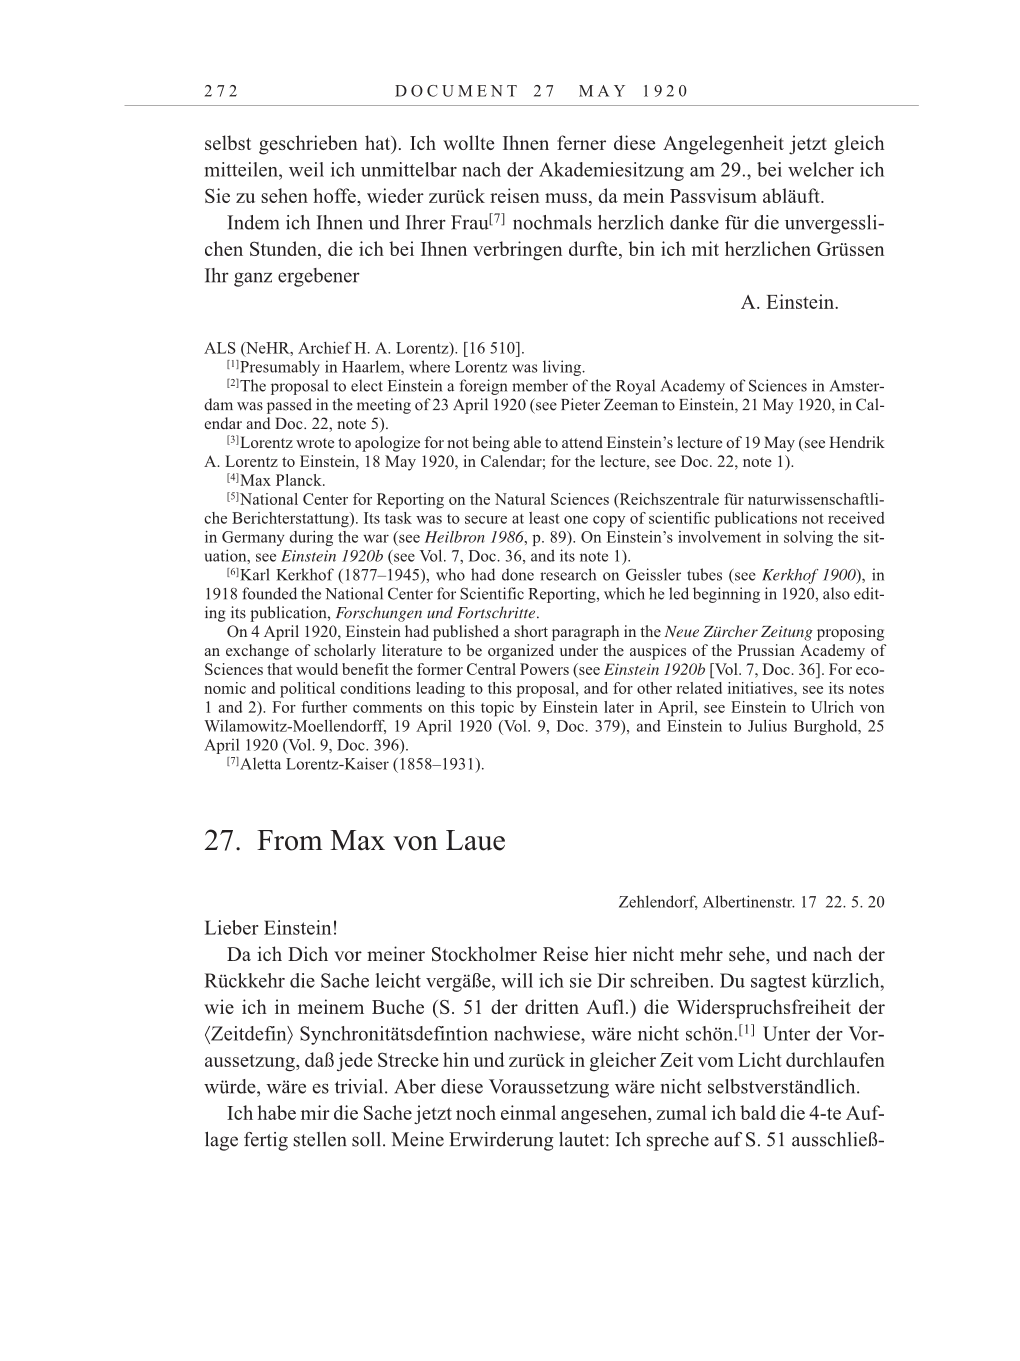 Volume 10: The Berlin Years: Correspondence May-December 1920 / Supplementary Correspondence 1909-1920 page 272